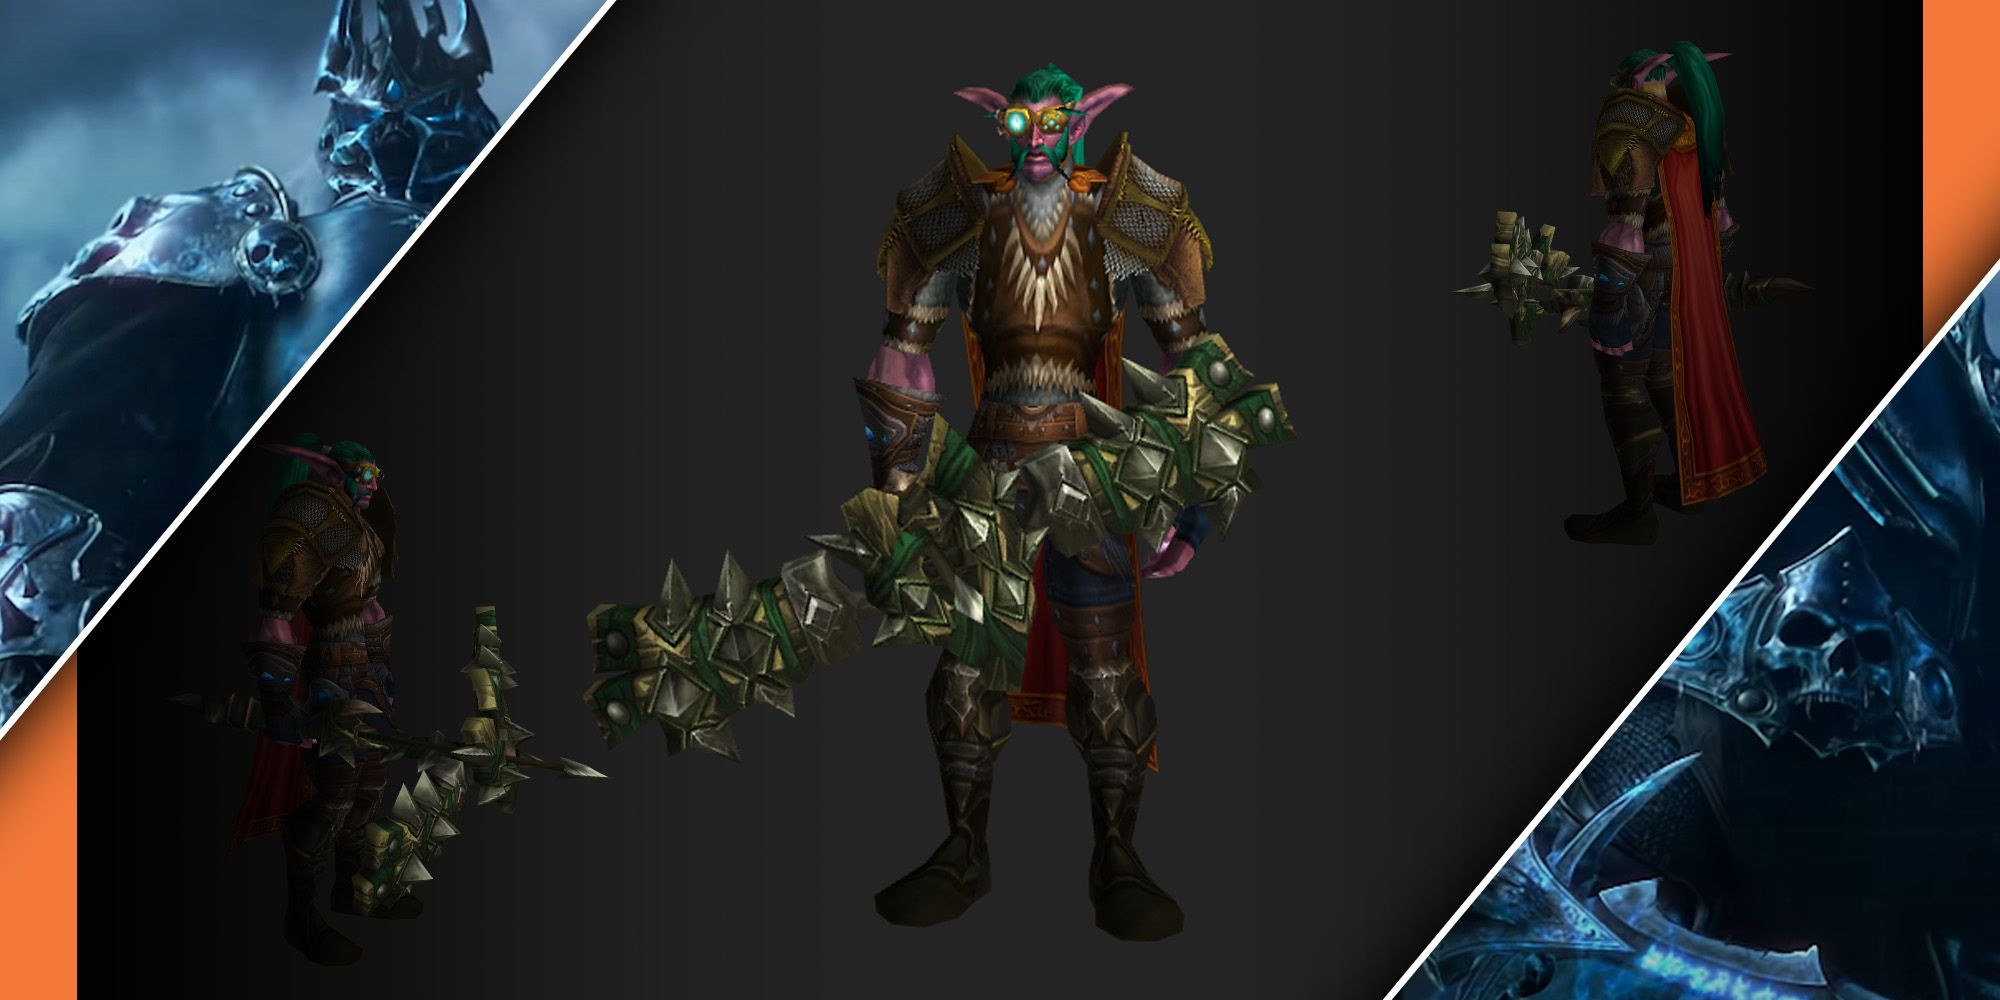 screenshot of the best in slot pre raid gear for hunter in wow wotlk classic wrath